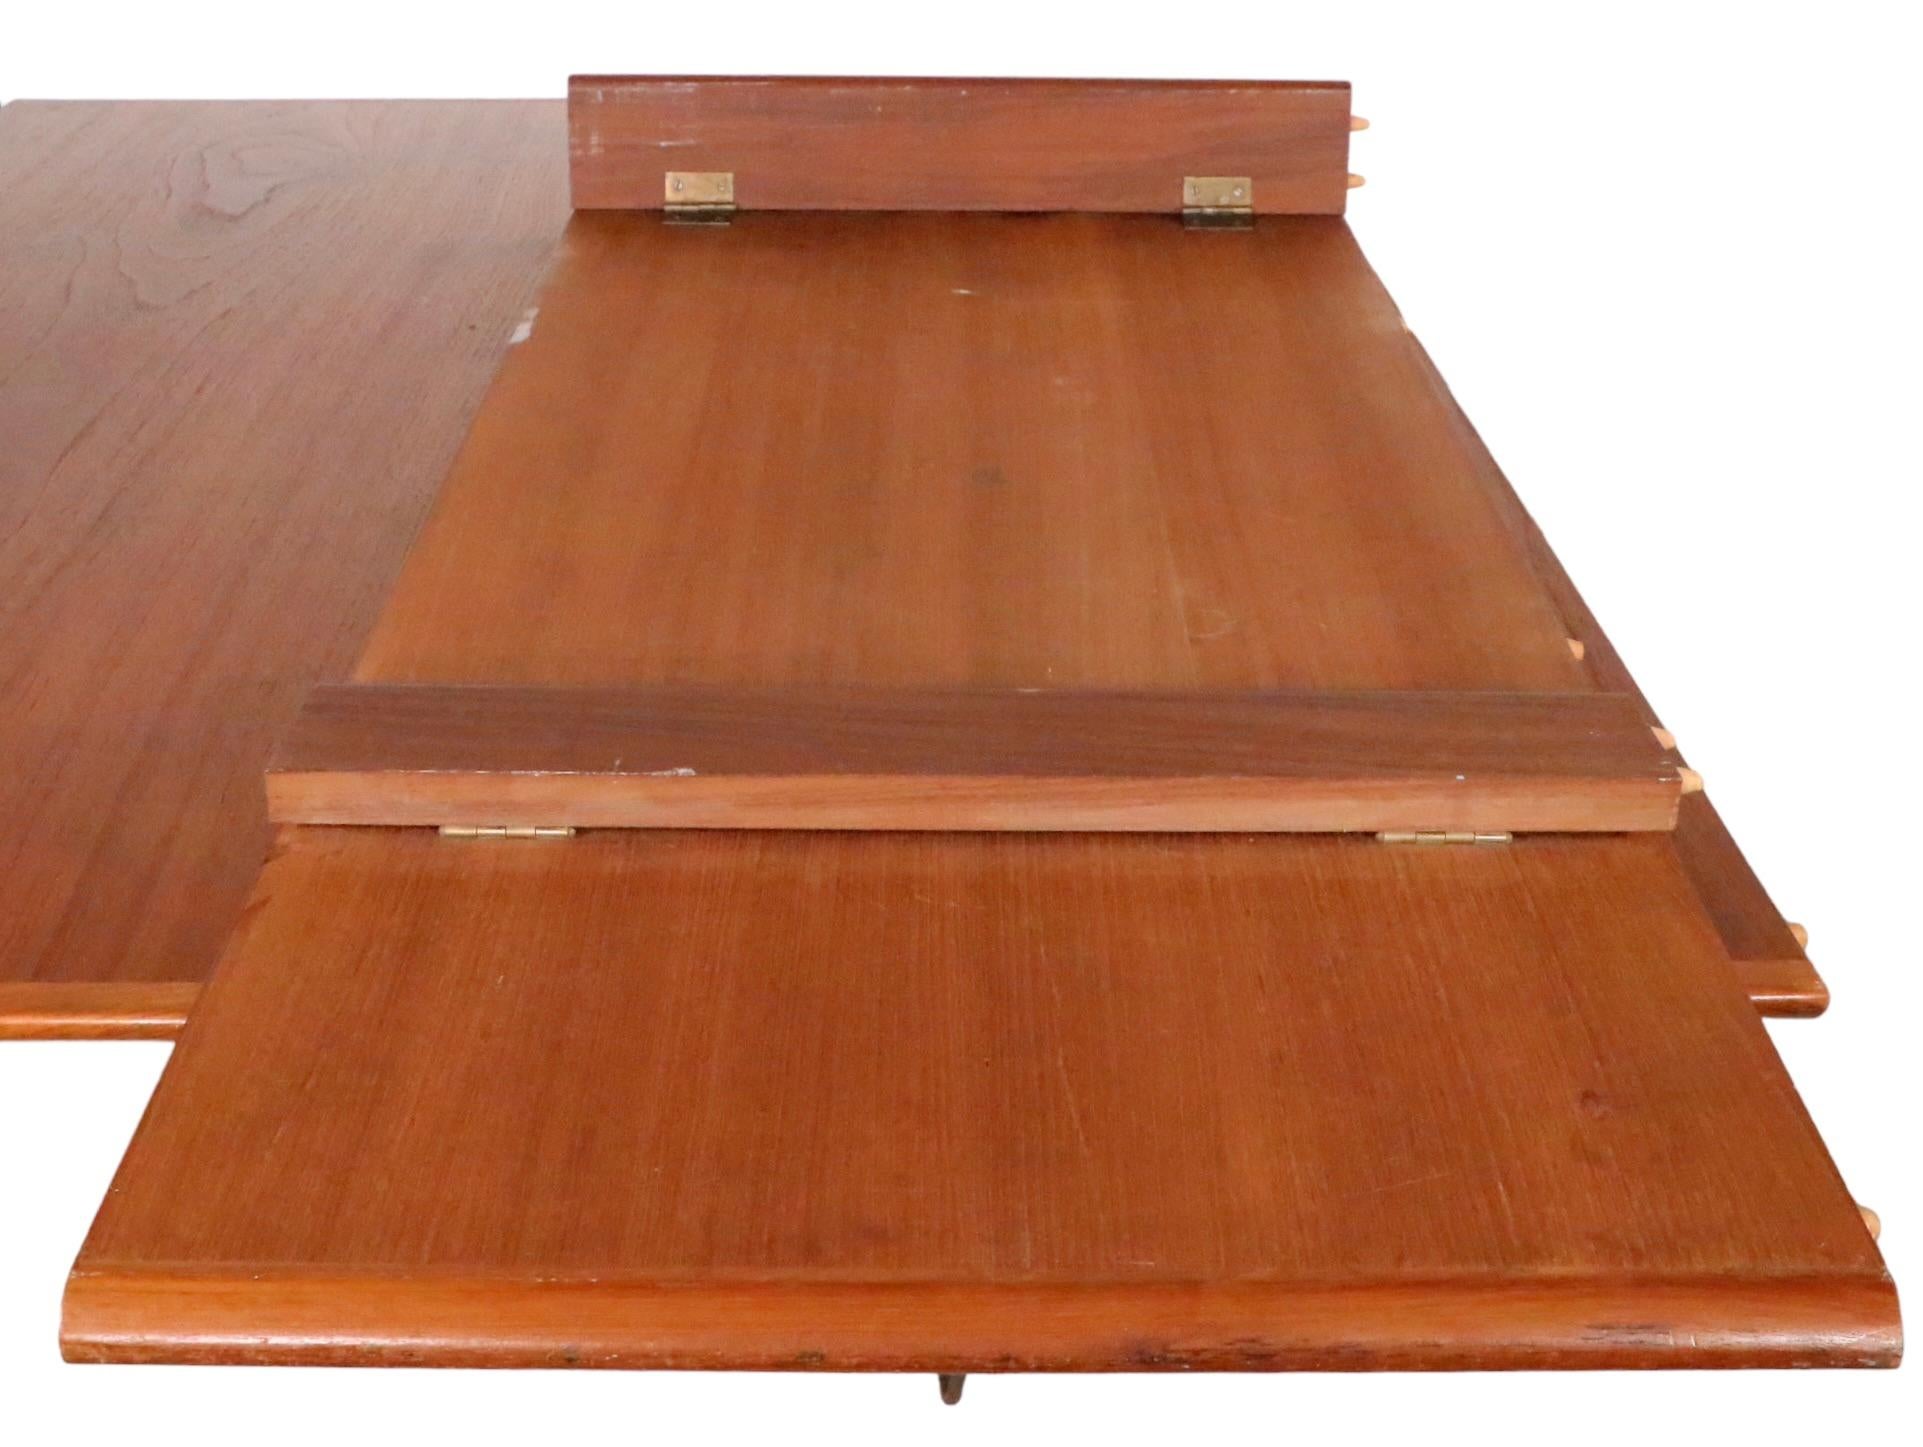 20th Century Danish Mid Century Modern Teak Extension  Dining Table by H W Klein  c 1950's For Sale